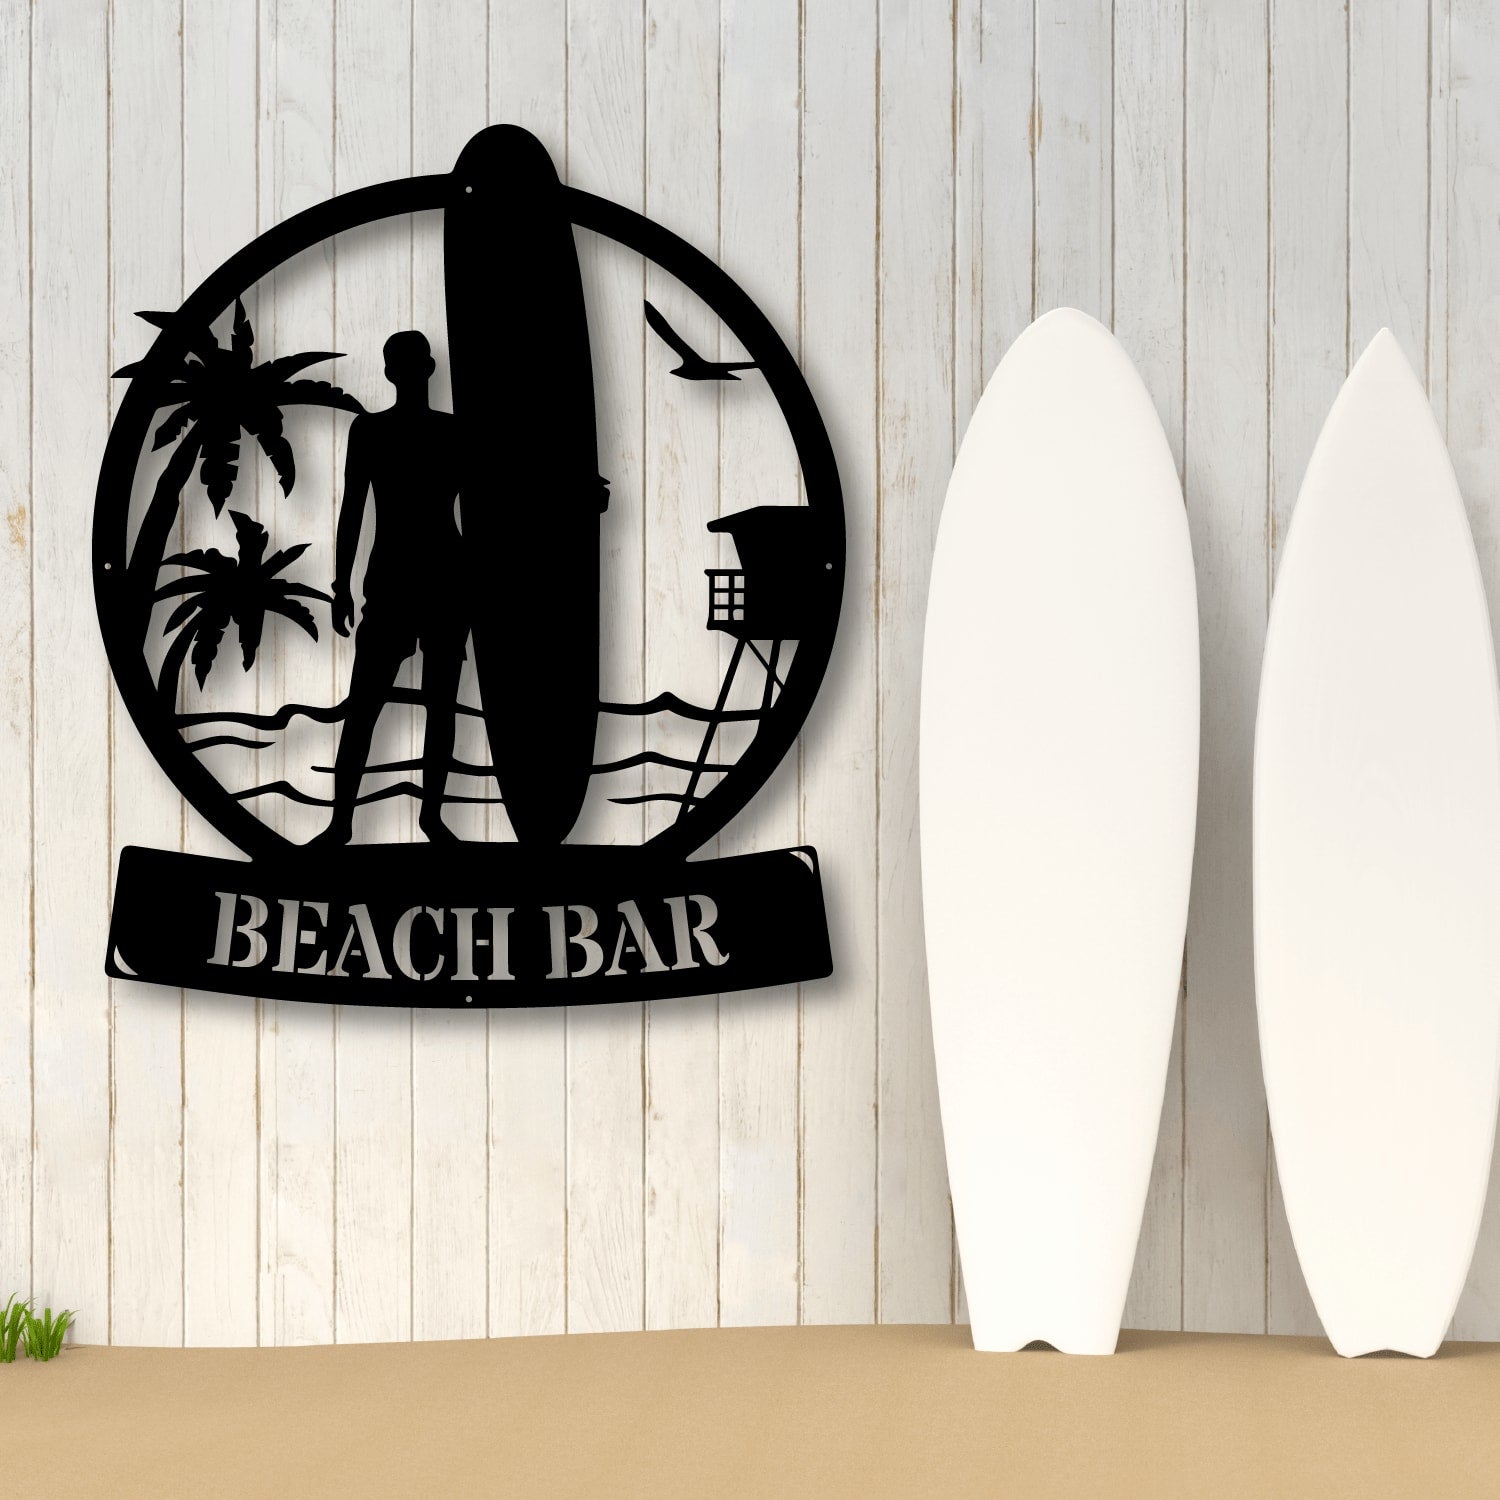 Custom Longboard Male Surfer Metal Sign - Outdoor Decor Metal Wall Art - Metal Signs For Home